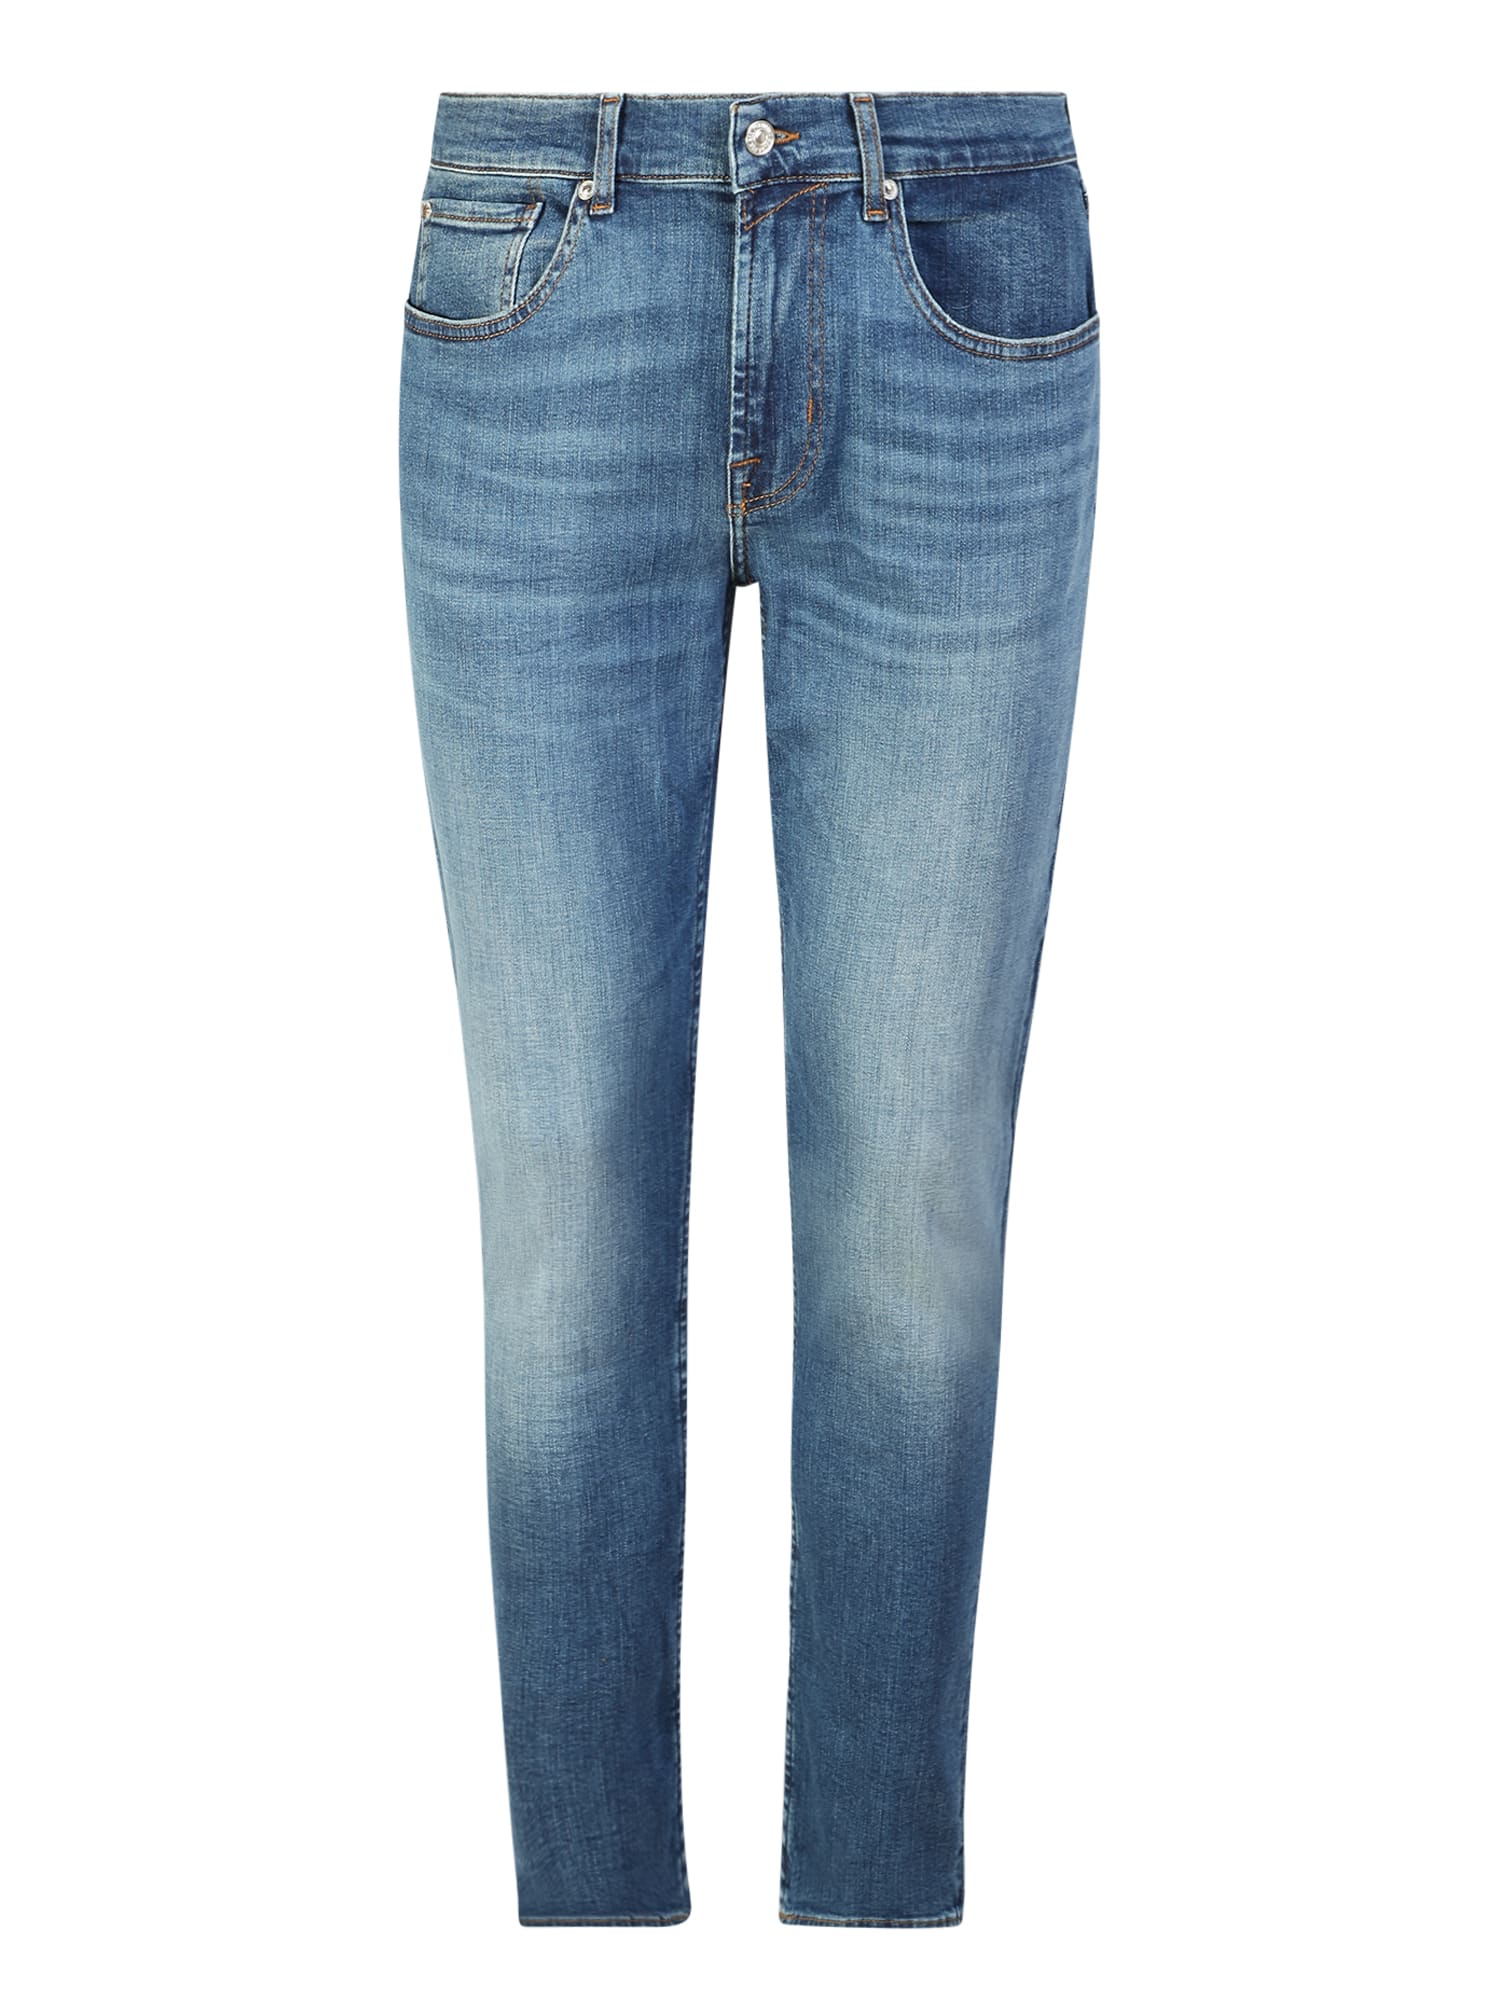 Simple And Essential 7 For All Mankind Slim Jeans